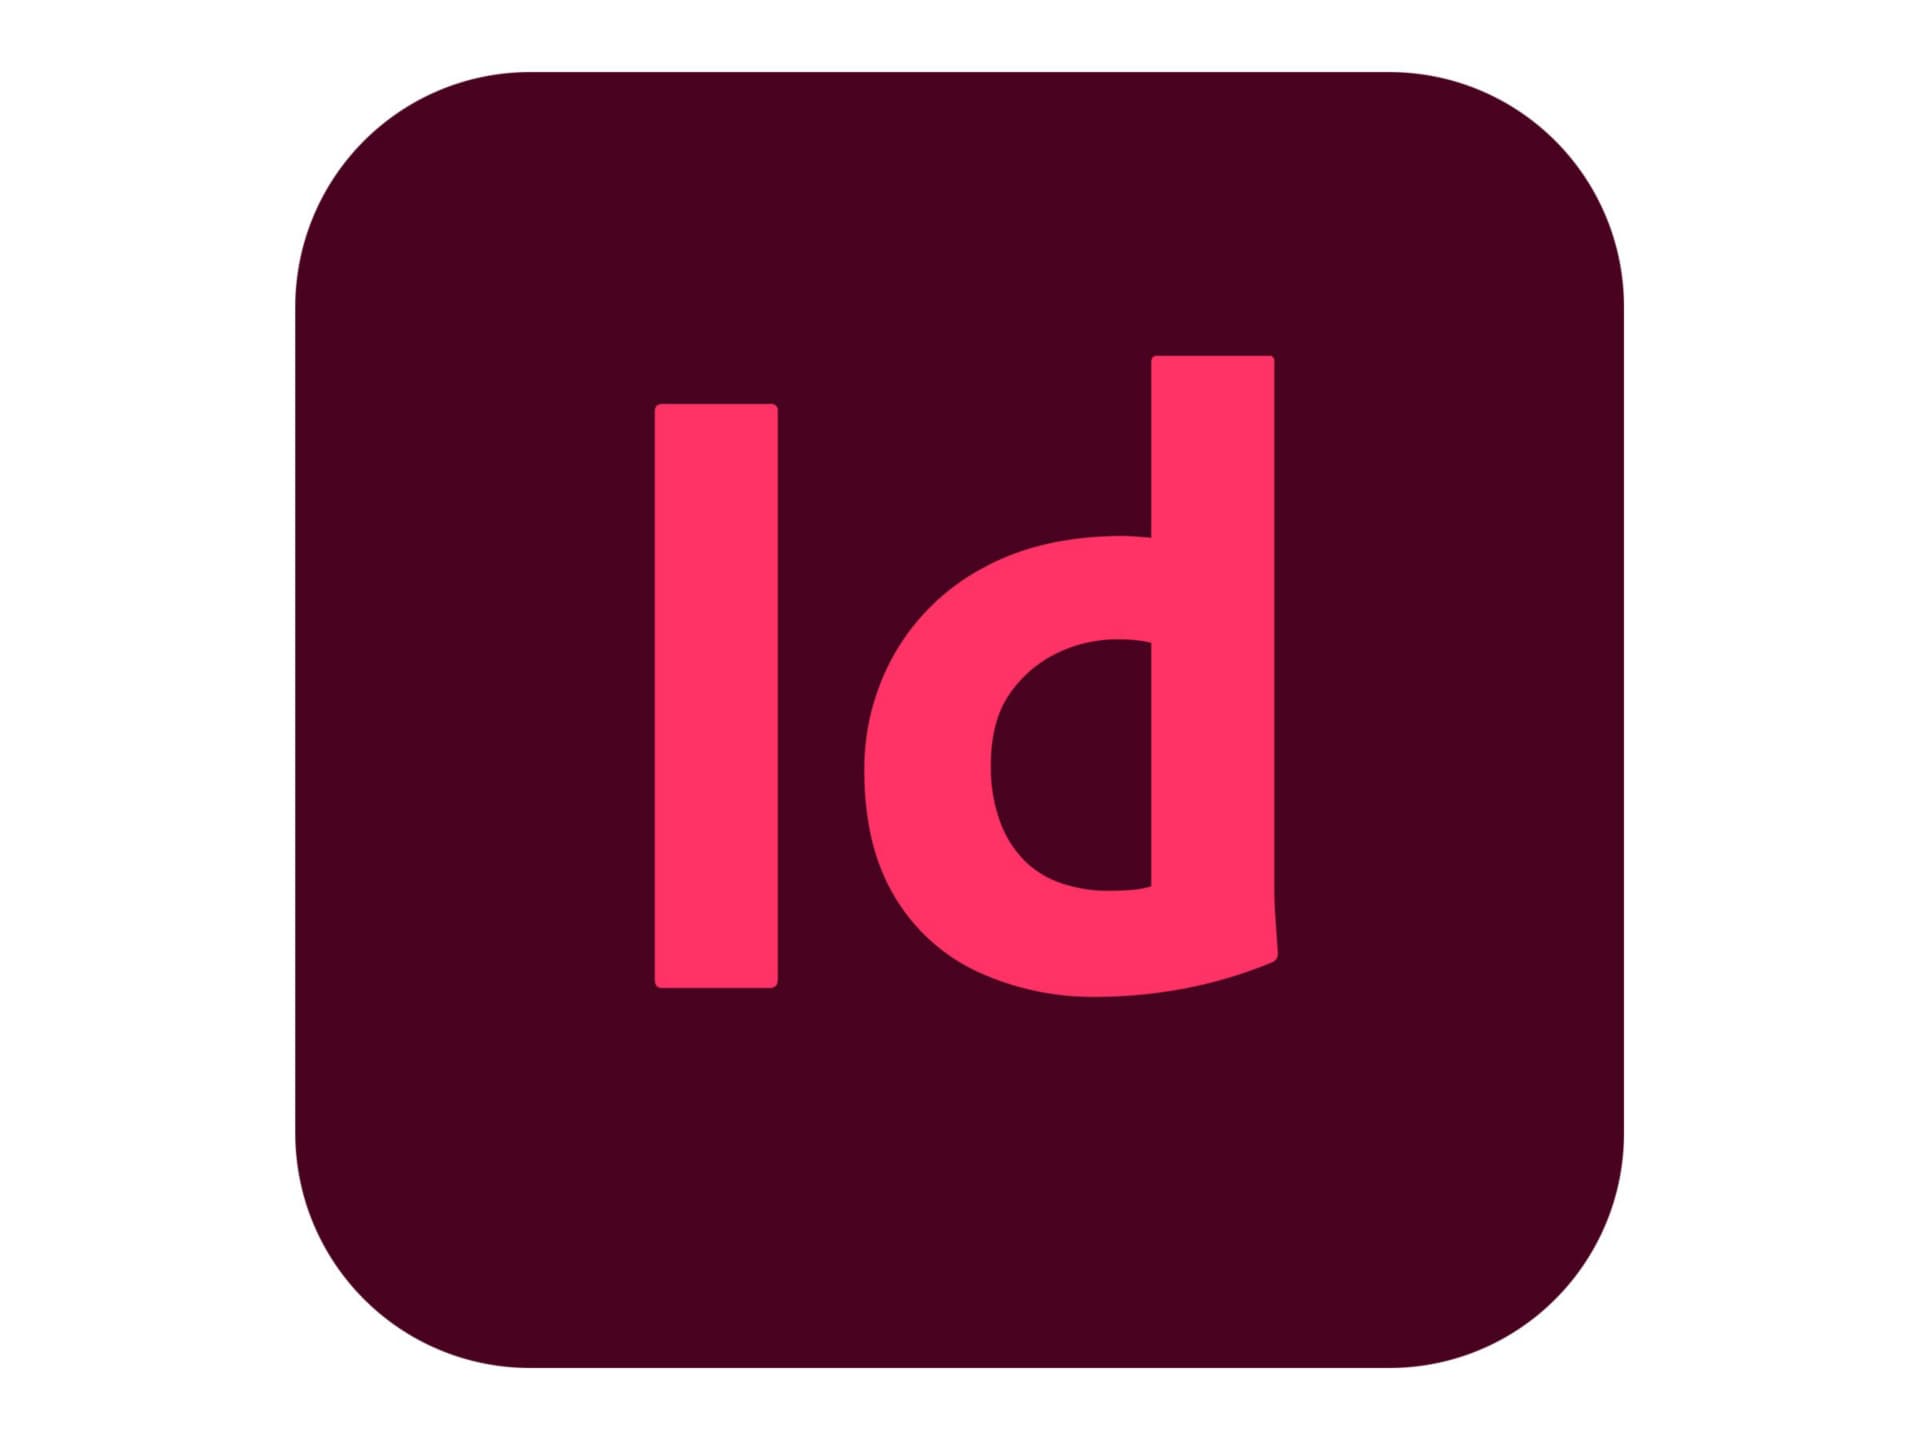 Adobe InDesign CC for teams - Subscription New (3 months) - 1 named user